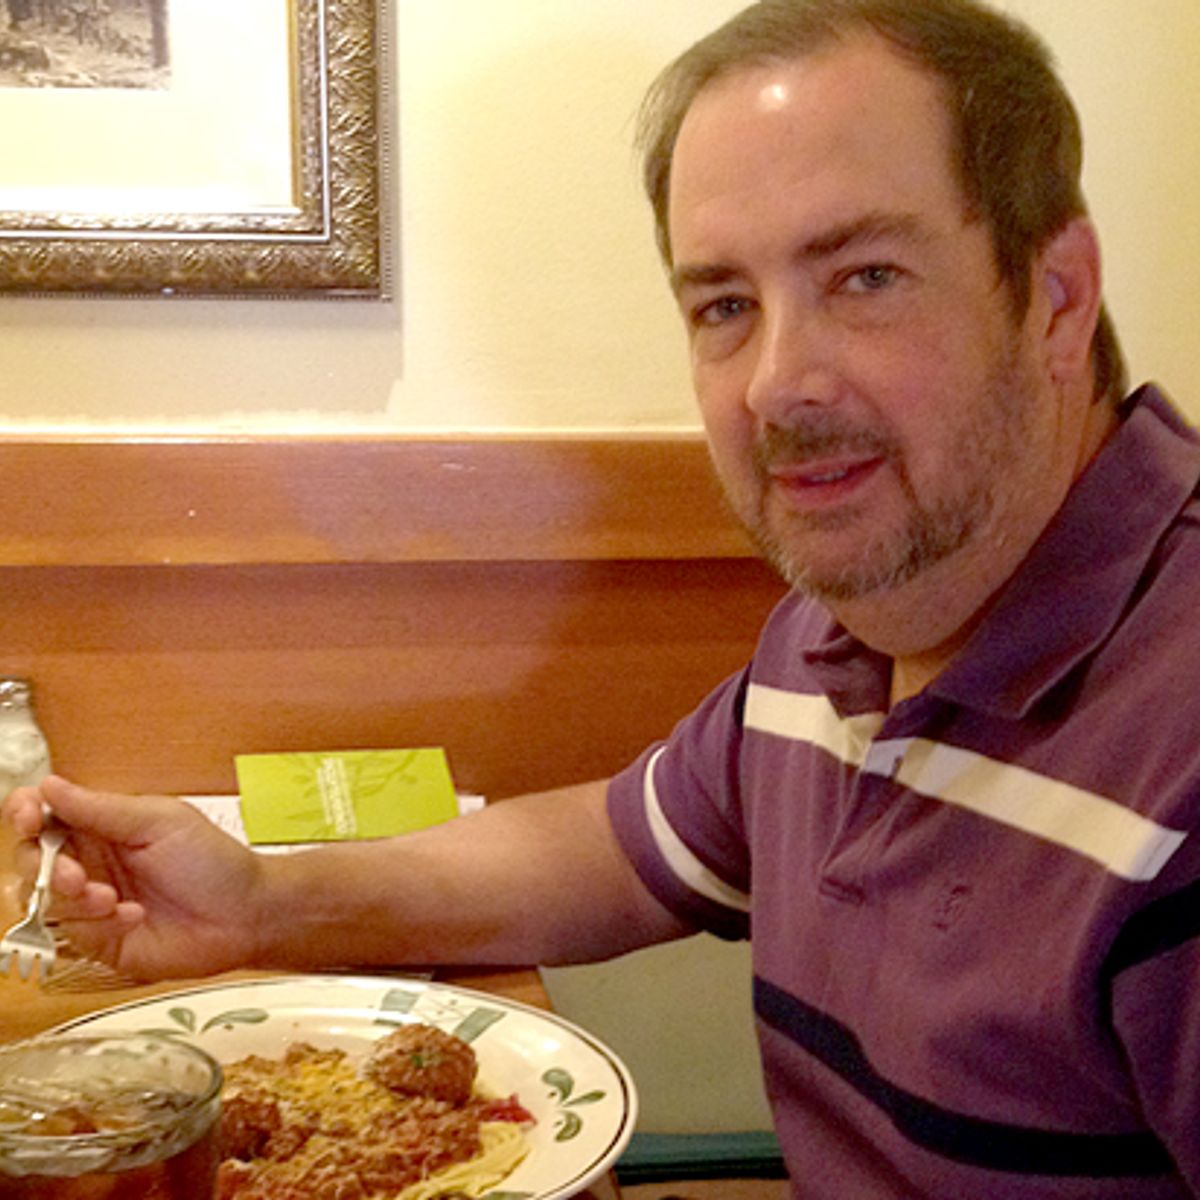 Update Man Eating Only Olive Garden Achieves His Goal Eats 1840